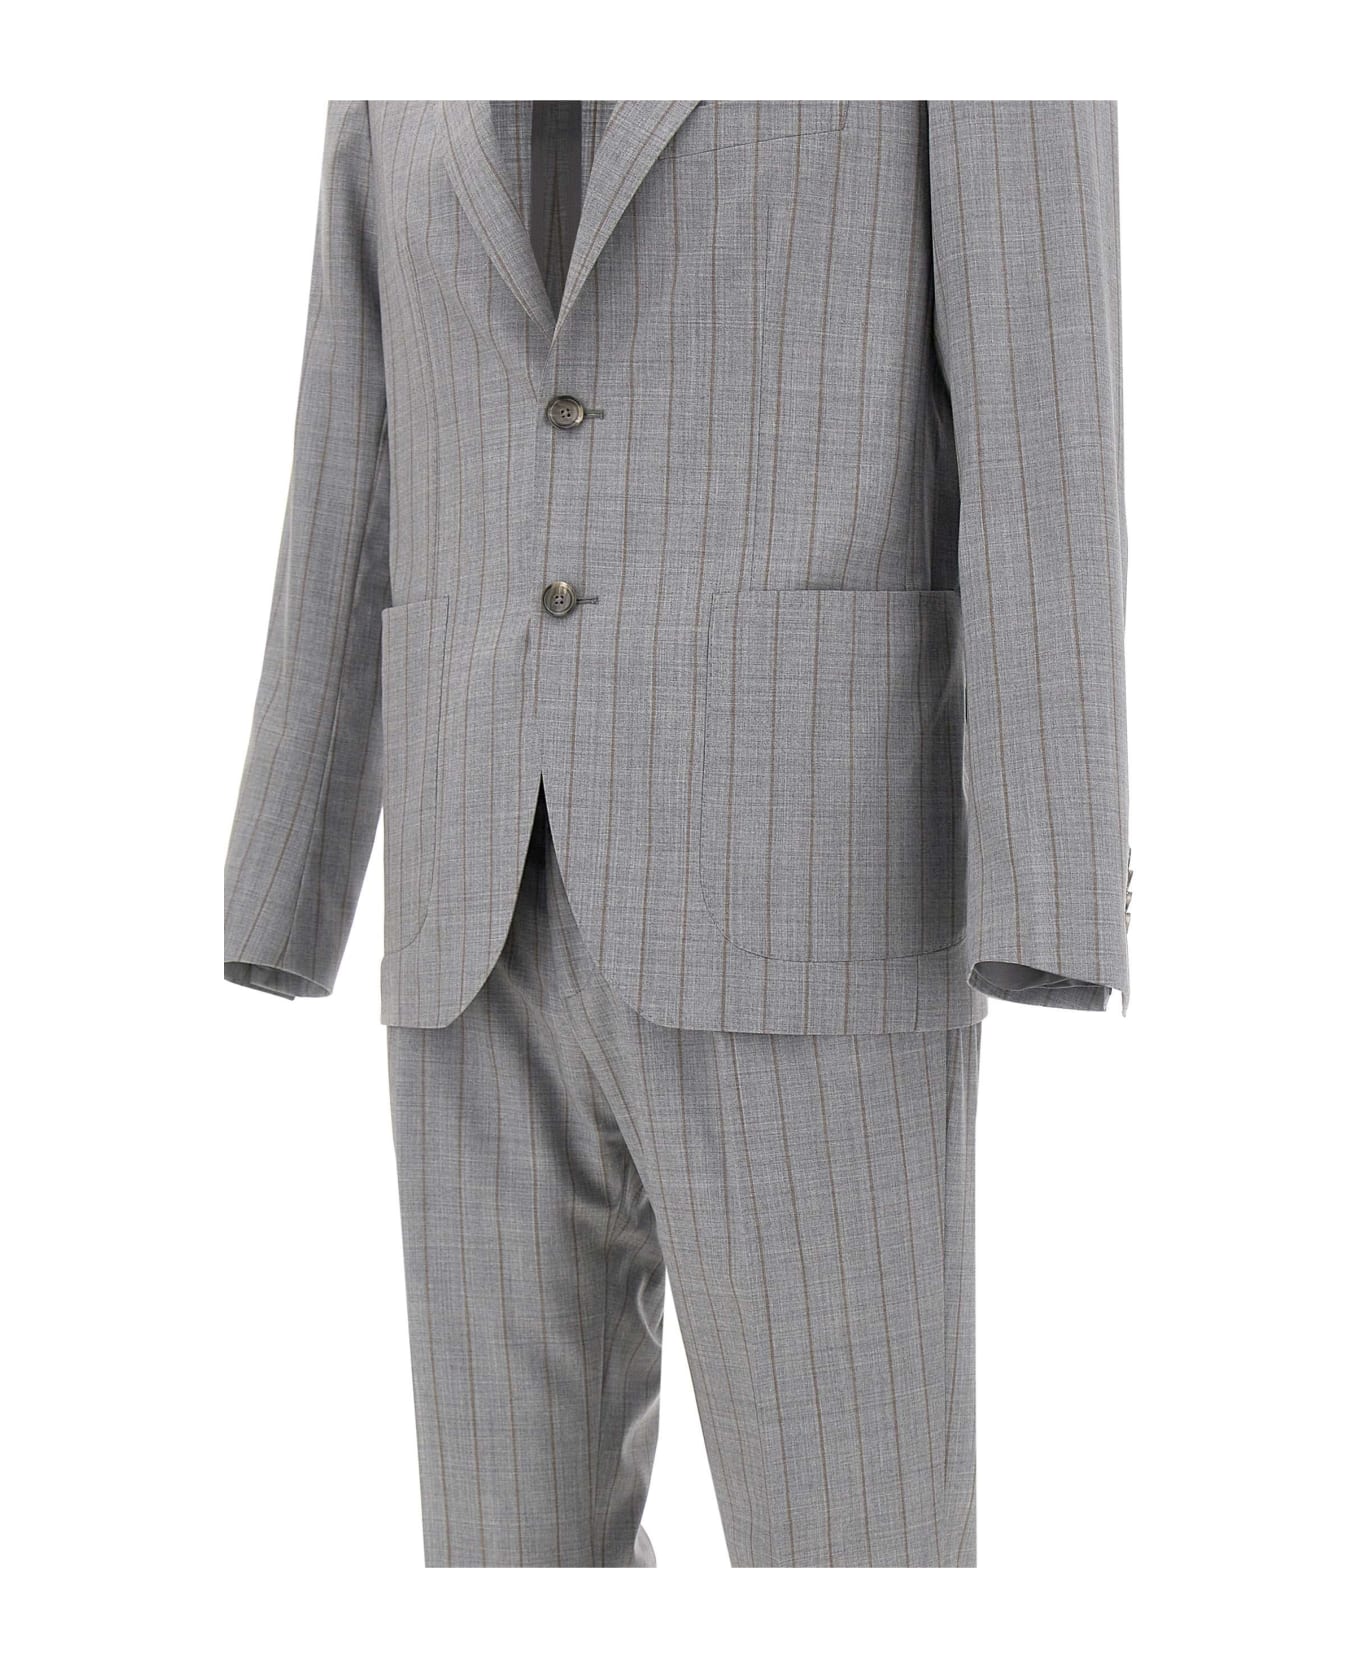 Tagliatore Cool Two-piece Suit - GREY スーツ